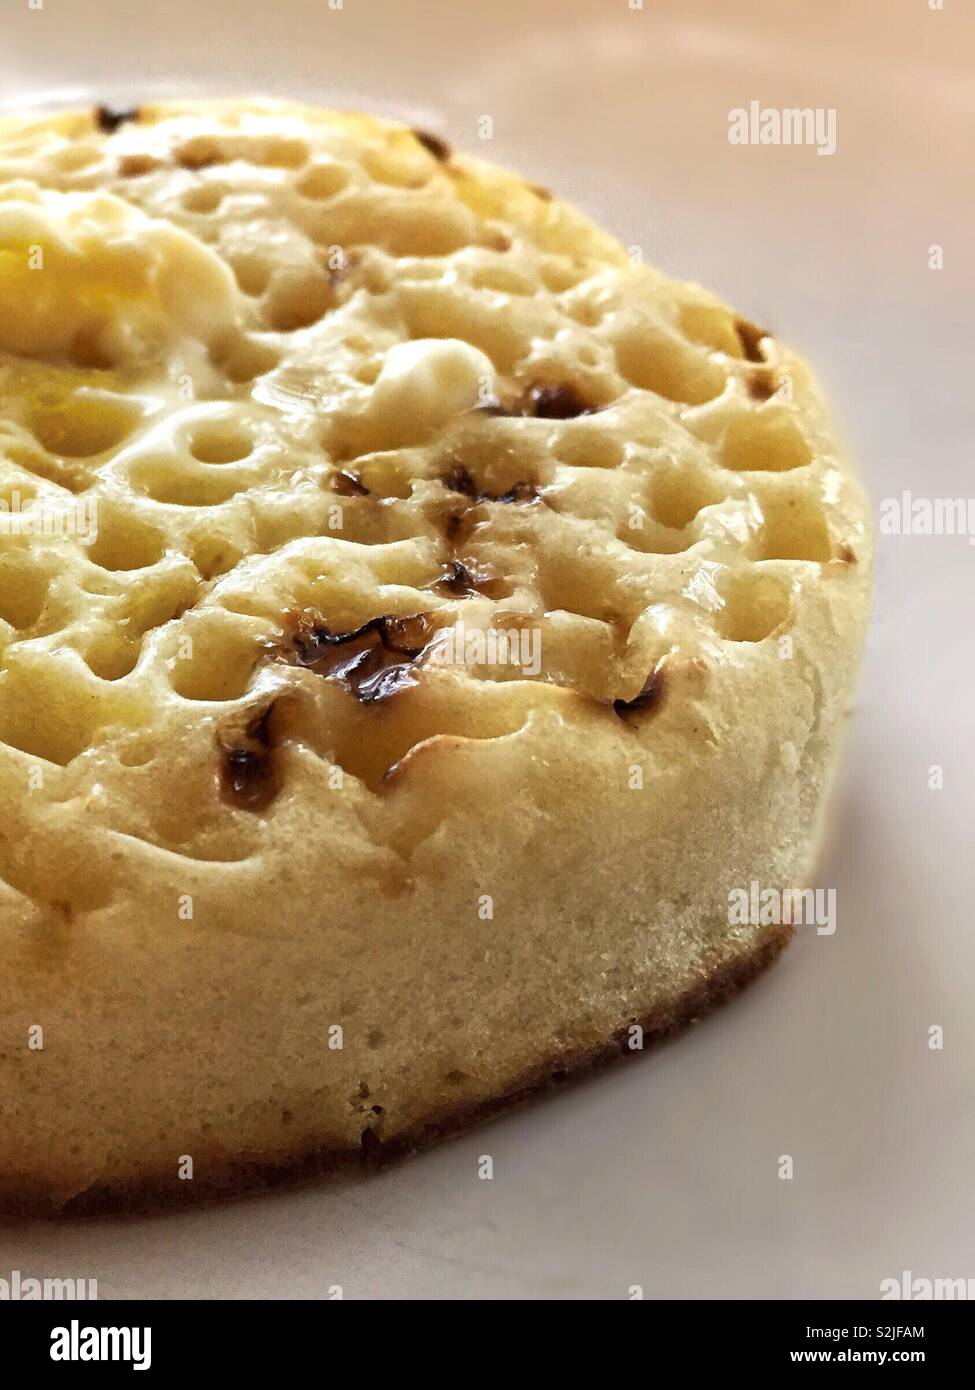 Crumpet for breakfast nice and hot and buttery.  Perfect filling start to the day toasted or grilled.  Crisp and soft pillowy bread based food Stock Photo